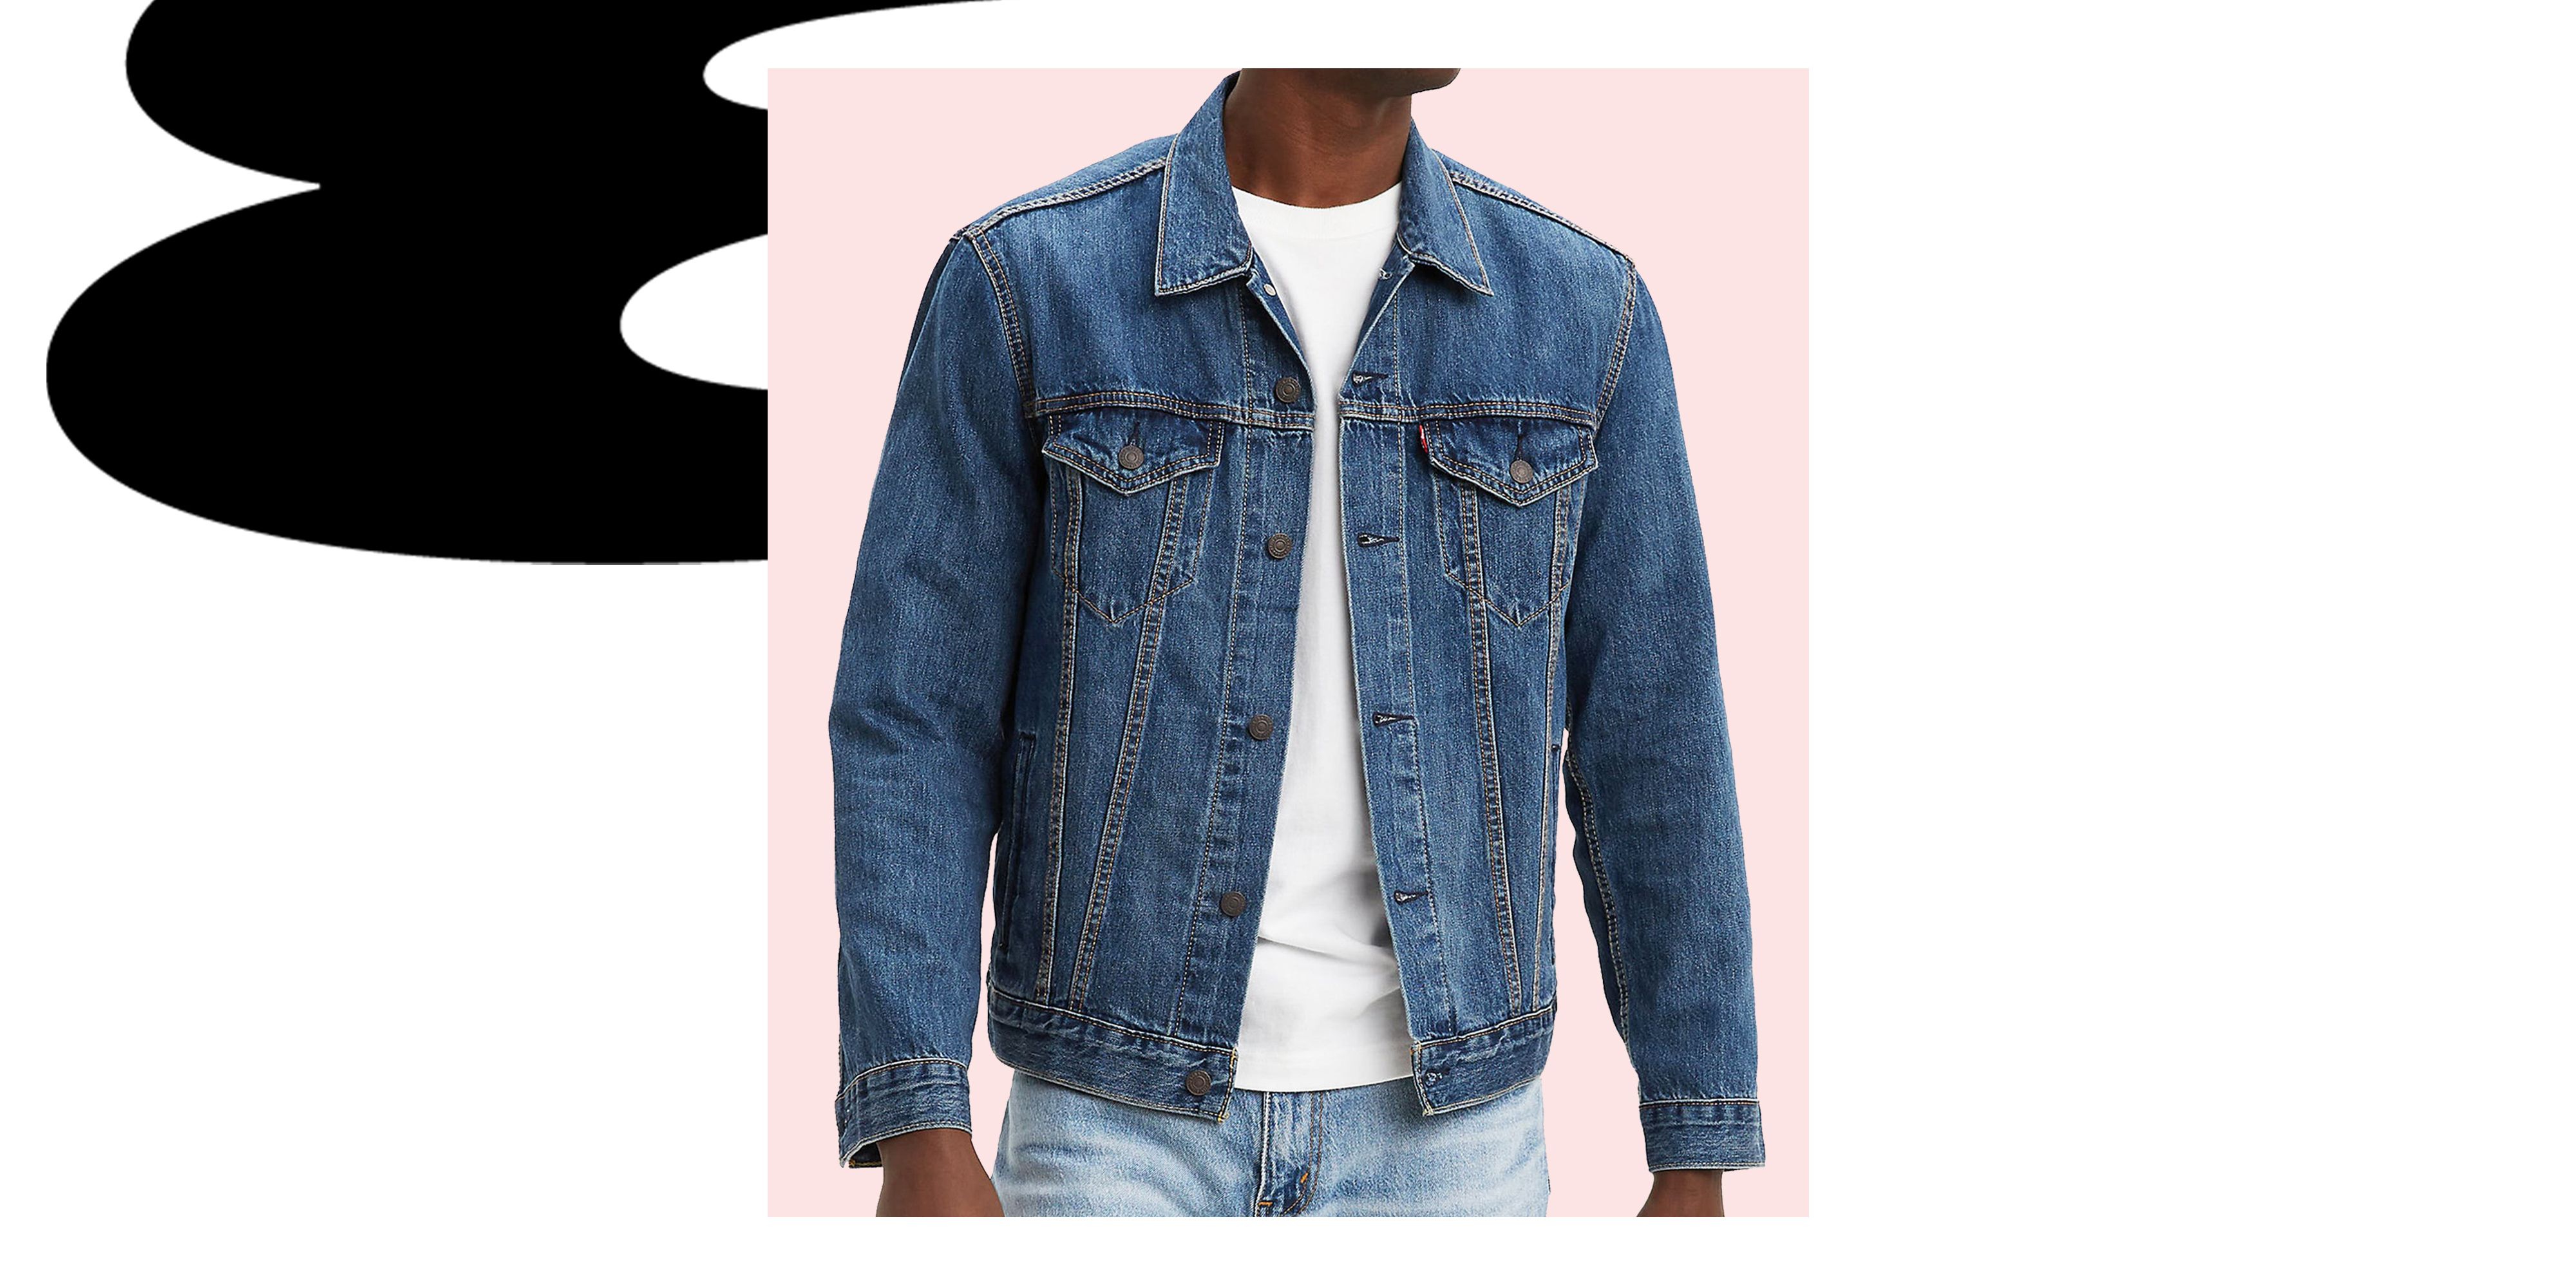 How To Wear A Denim Jacket For Men Outfit And Style Guide 2023   FashionBeans